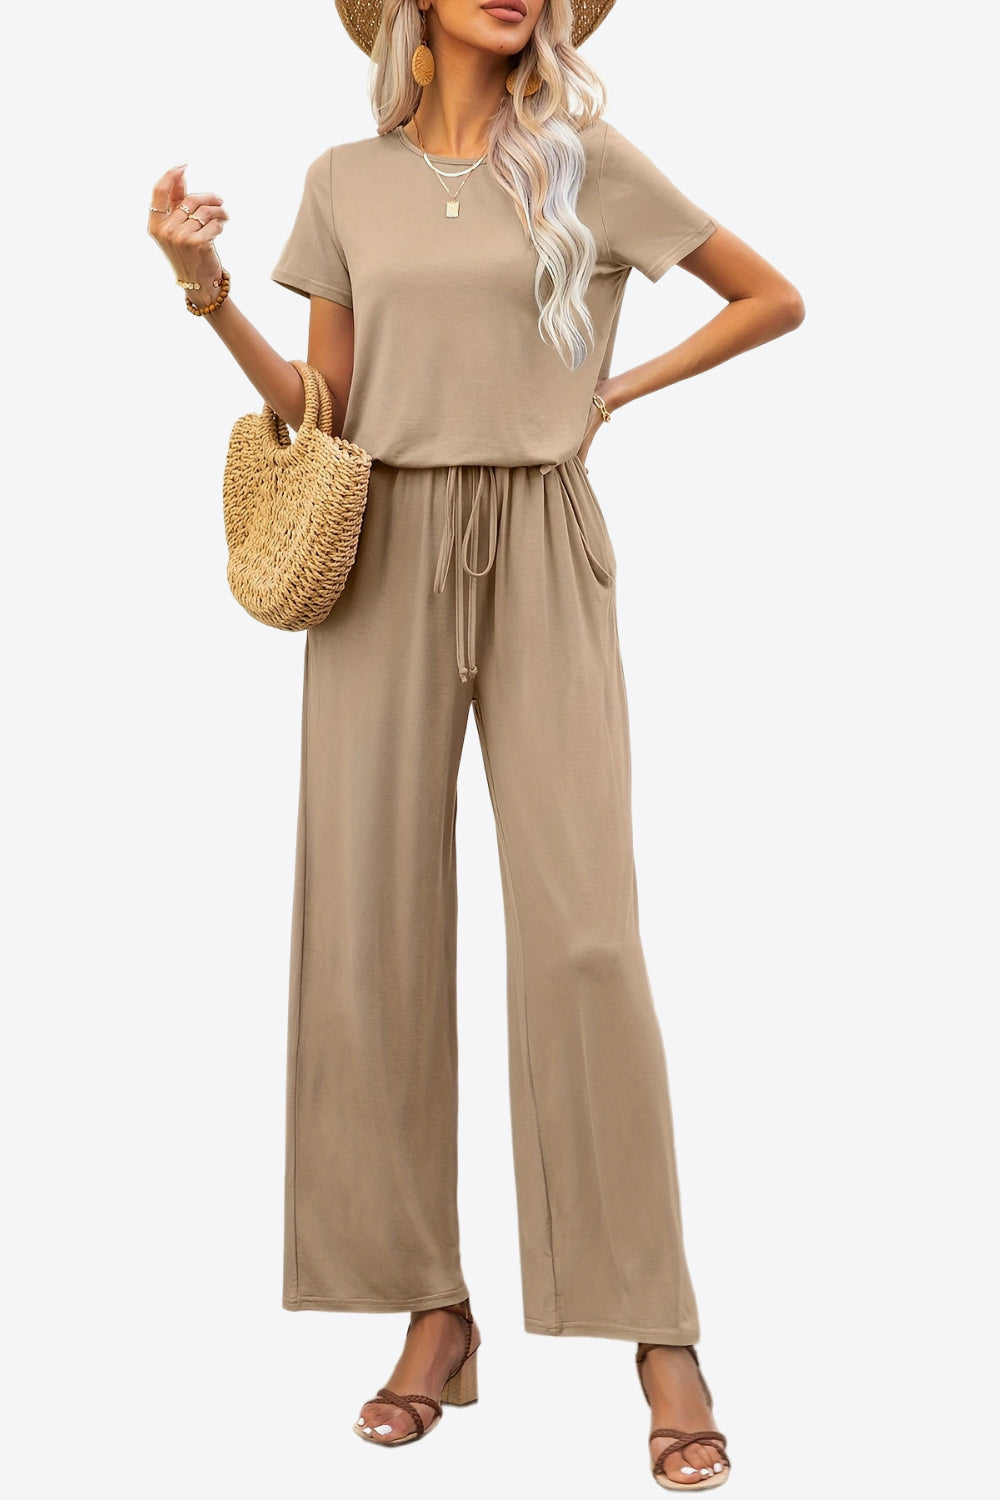 Round Neck Short Sleeve Jumpsuit with Pockets